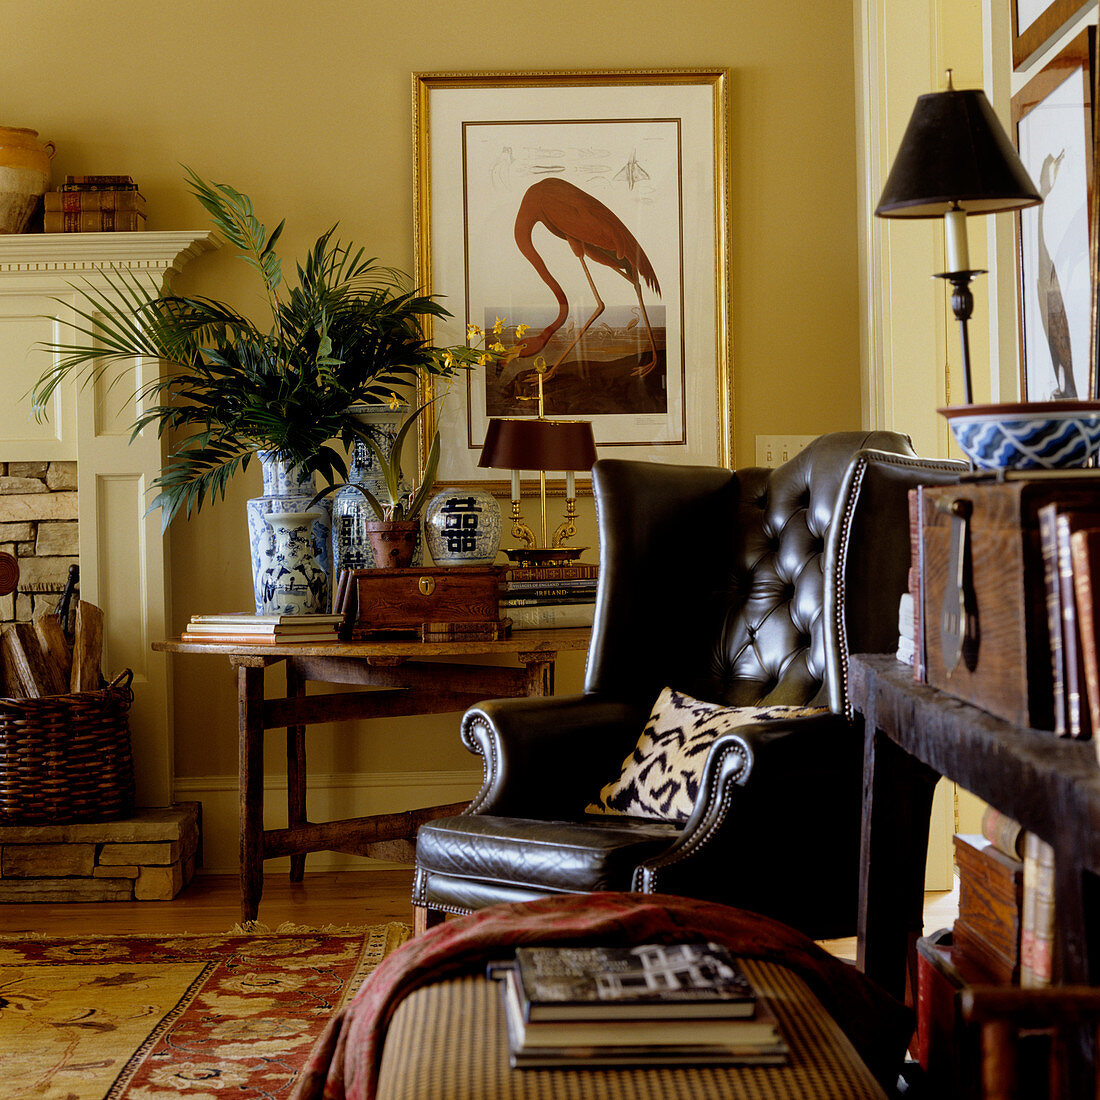 Dark brown leather armchair in corner of traditional living room